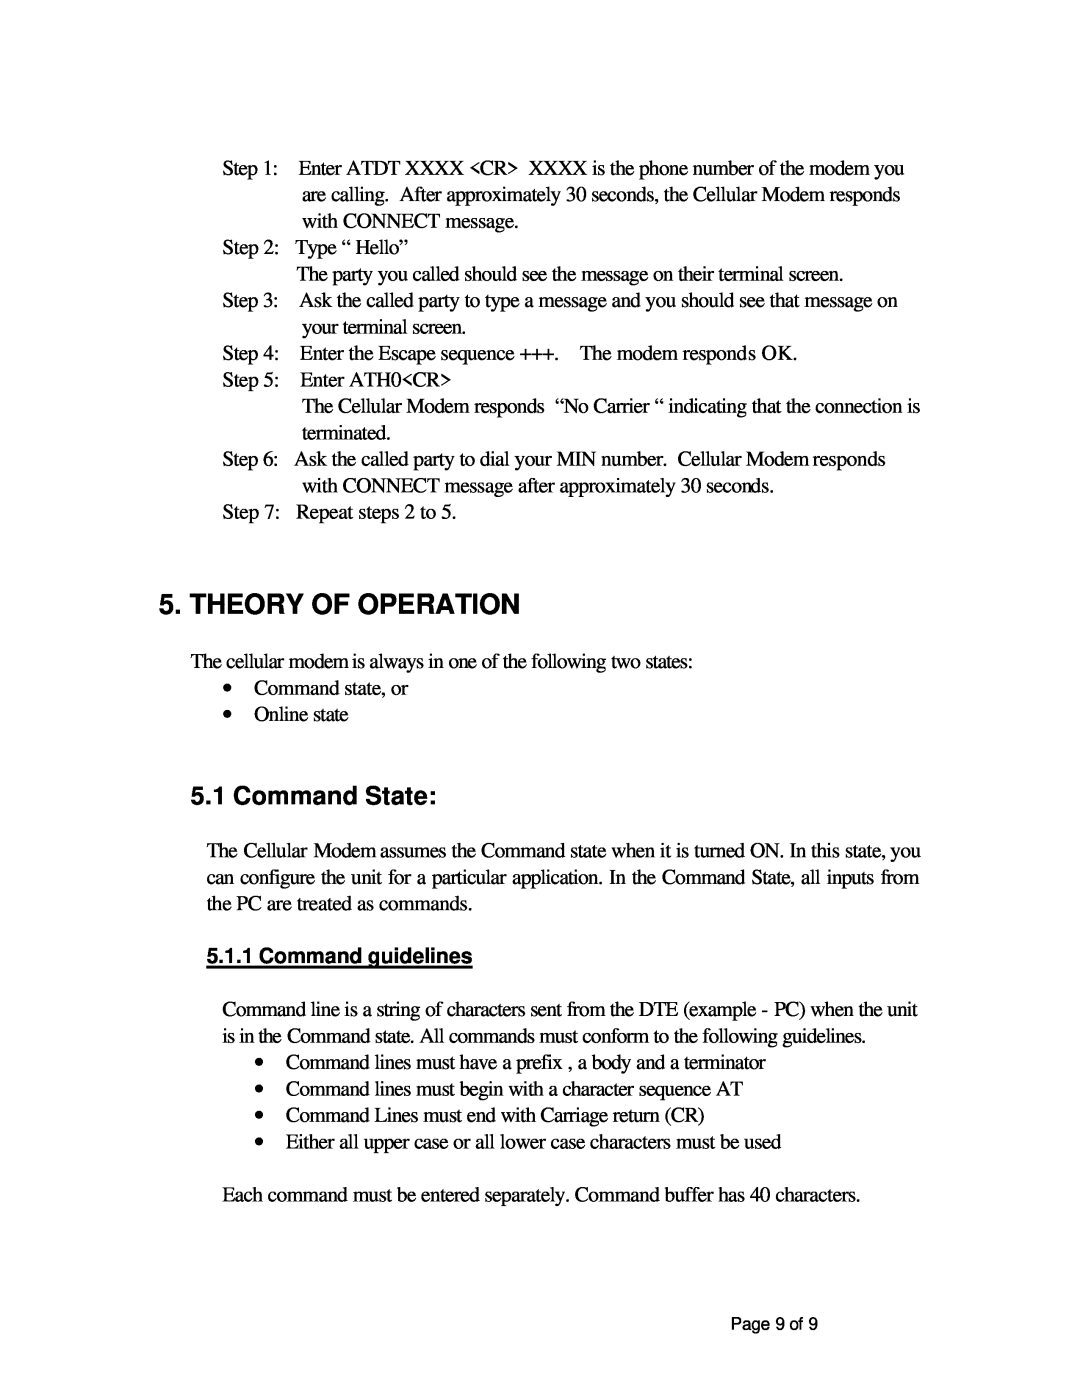 ATO CMM 900-3W manual Theory Of Operation, Command State, Command guidelines 